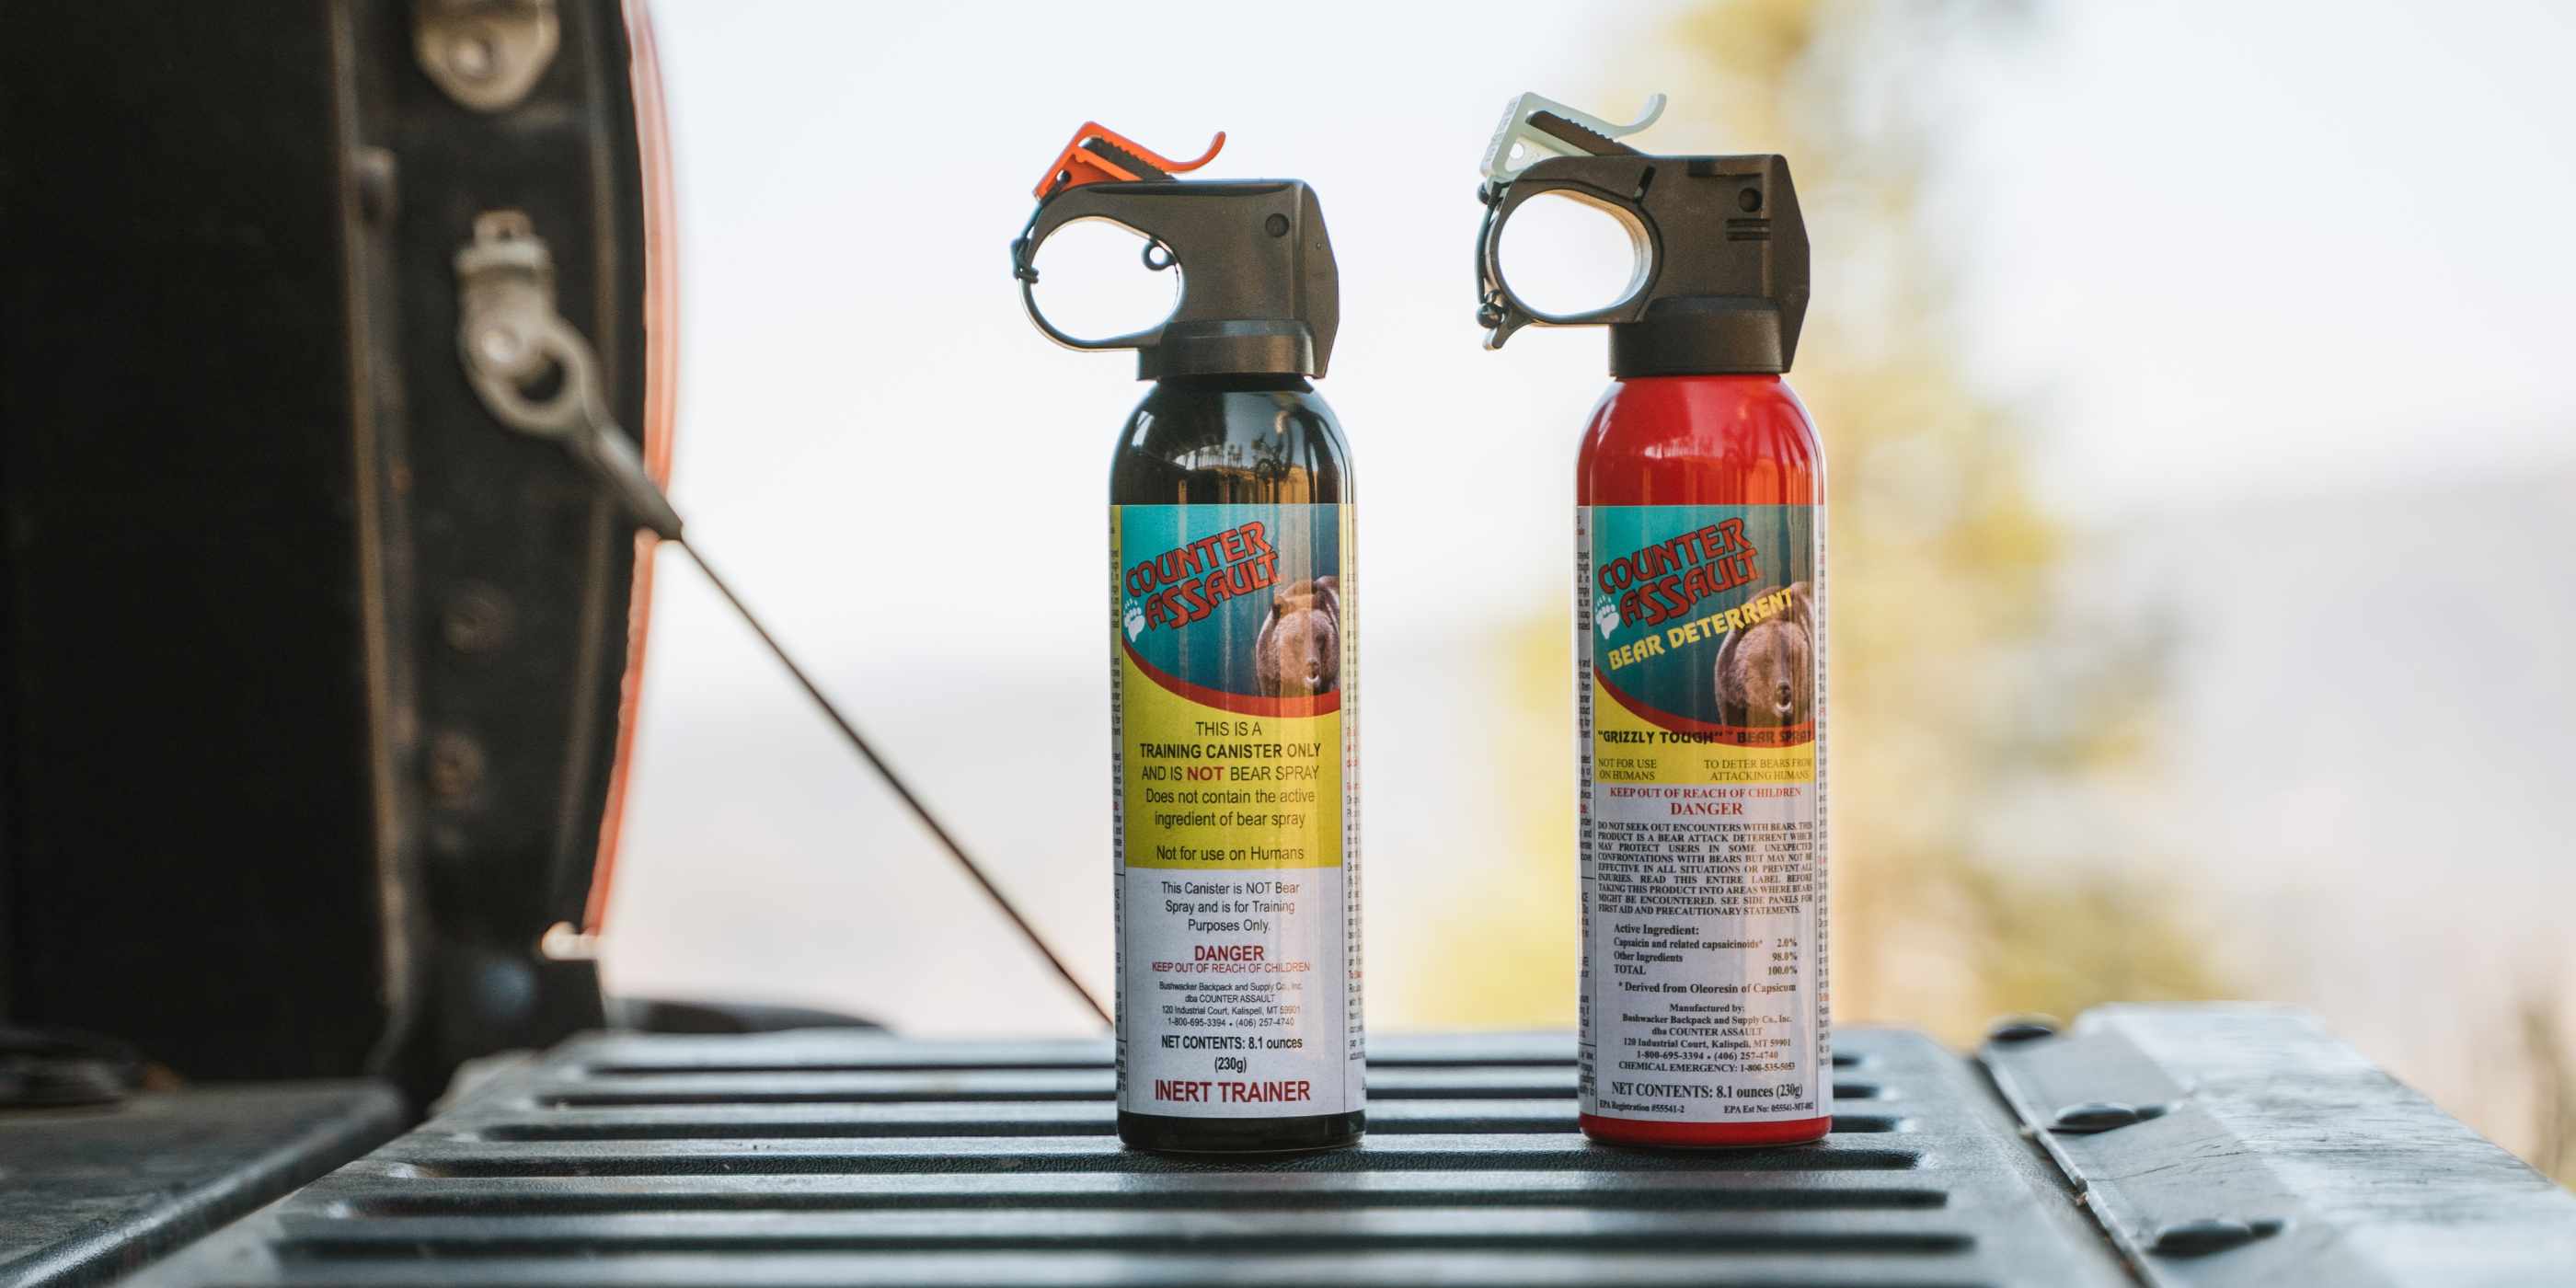 8.1 oz bear spray and training canister on back of truck